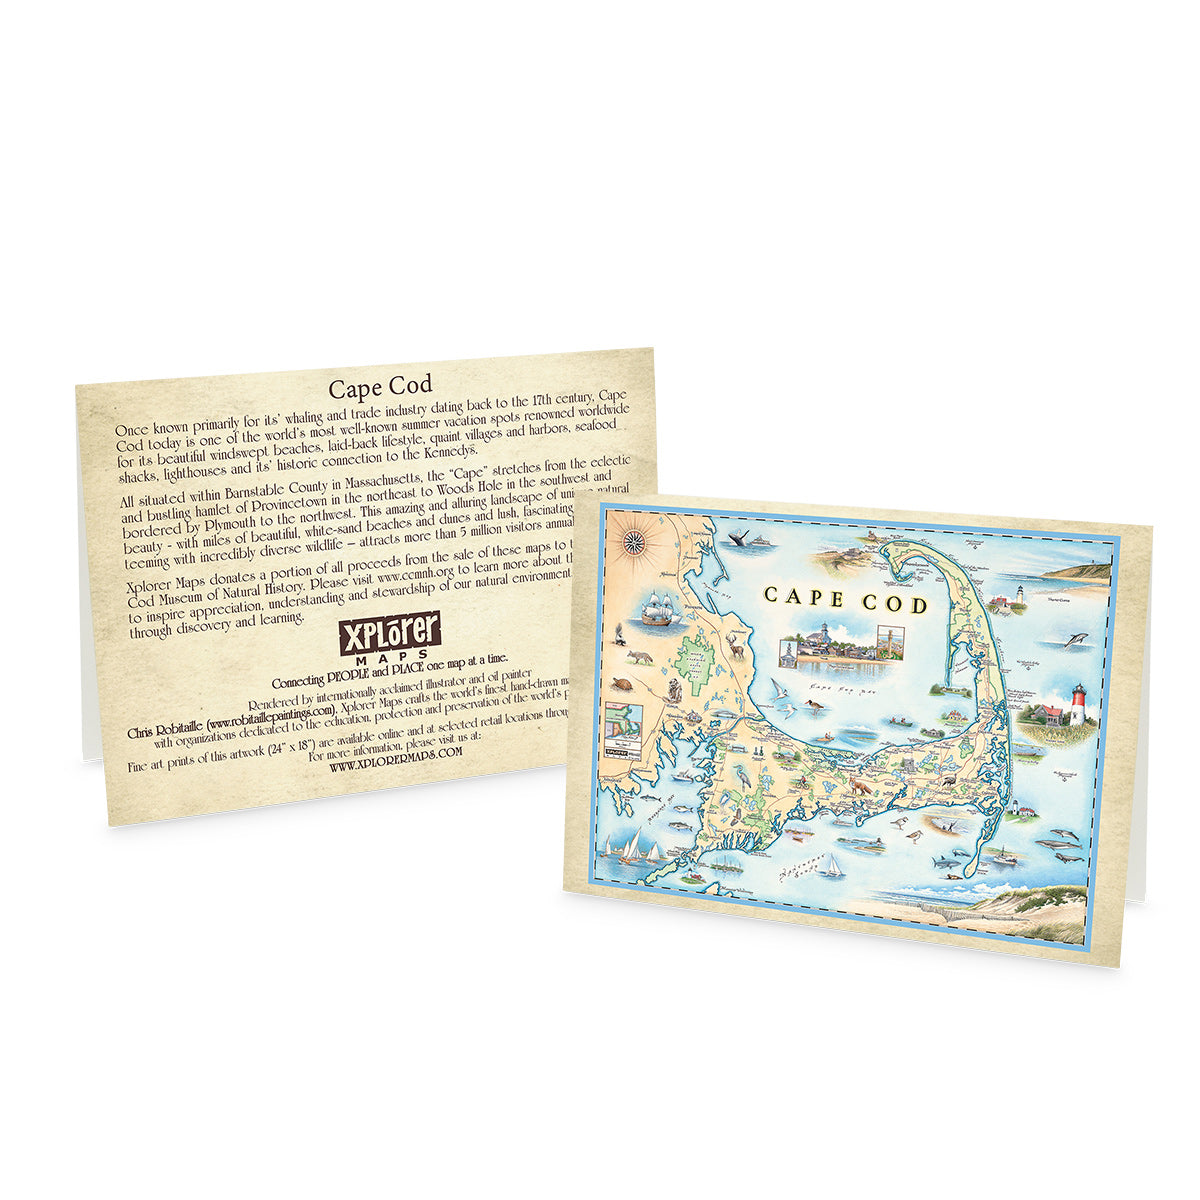 Cape Cod Map blank notecards in earth tone colors. Featuring Plymouth Rock, fish, crane, fox, Provincetown, canoeing, biking, beach, lighthouse, and ocean. Set of 12